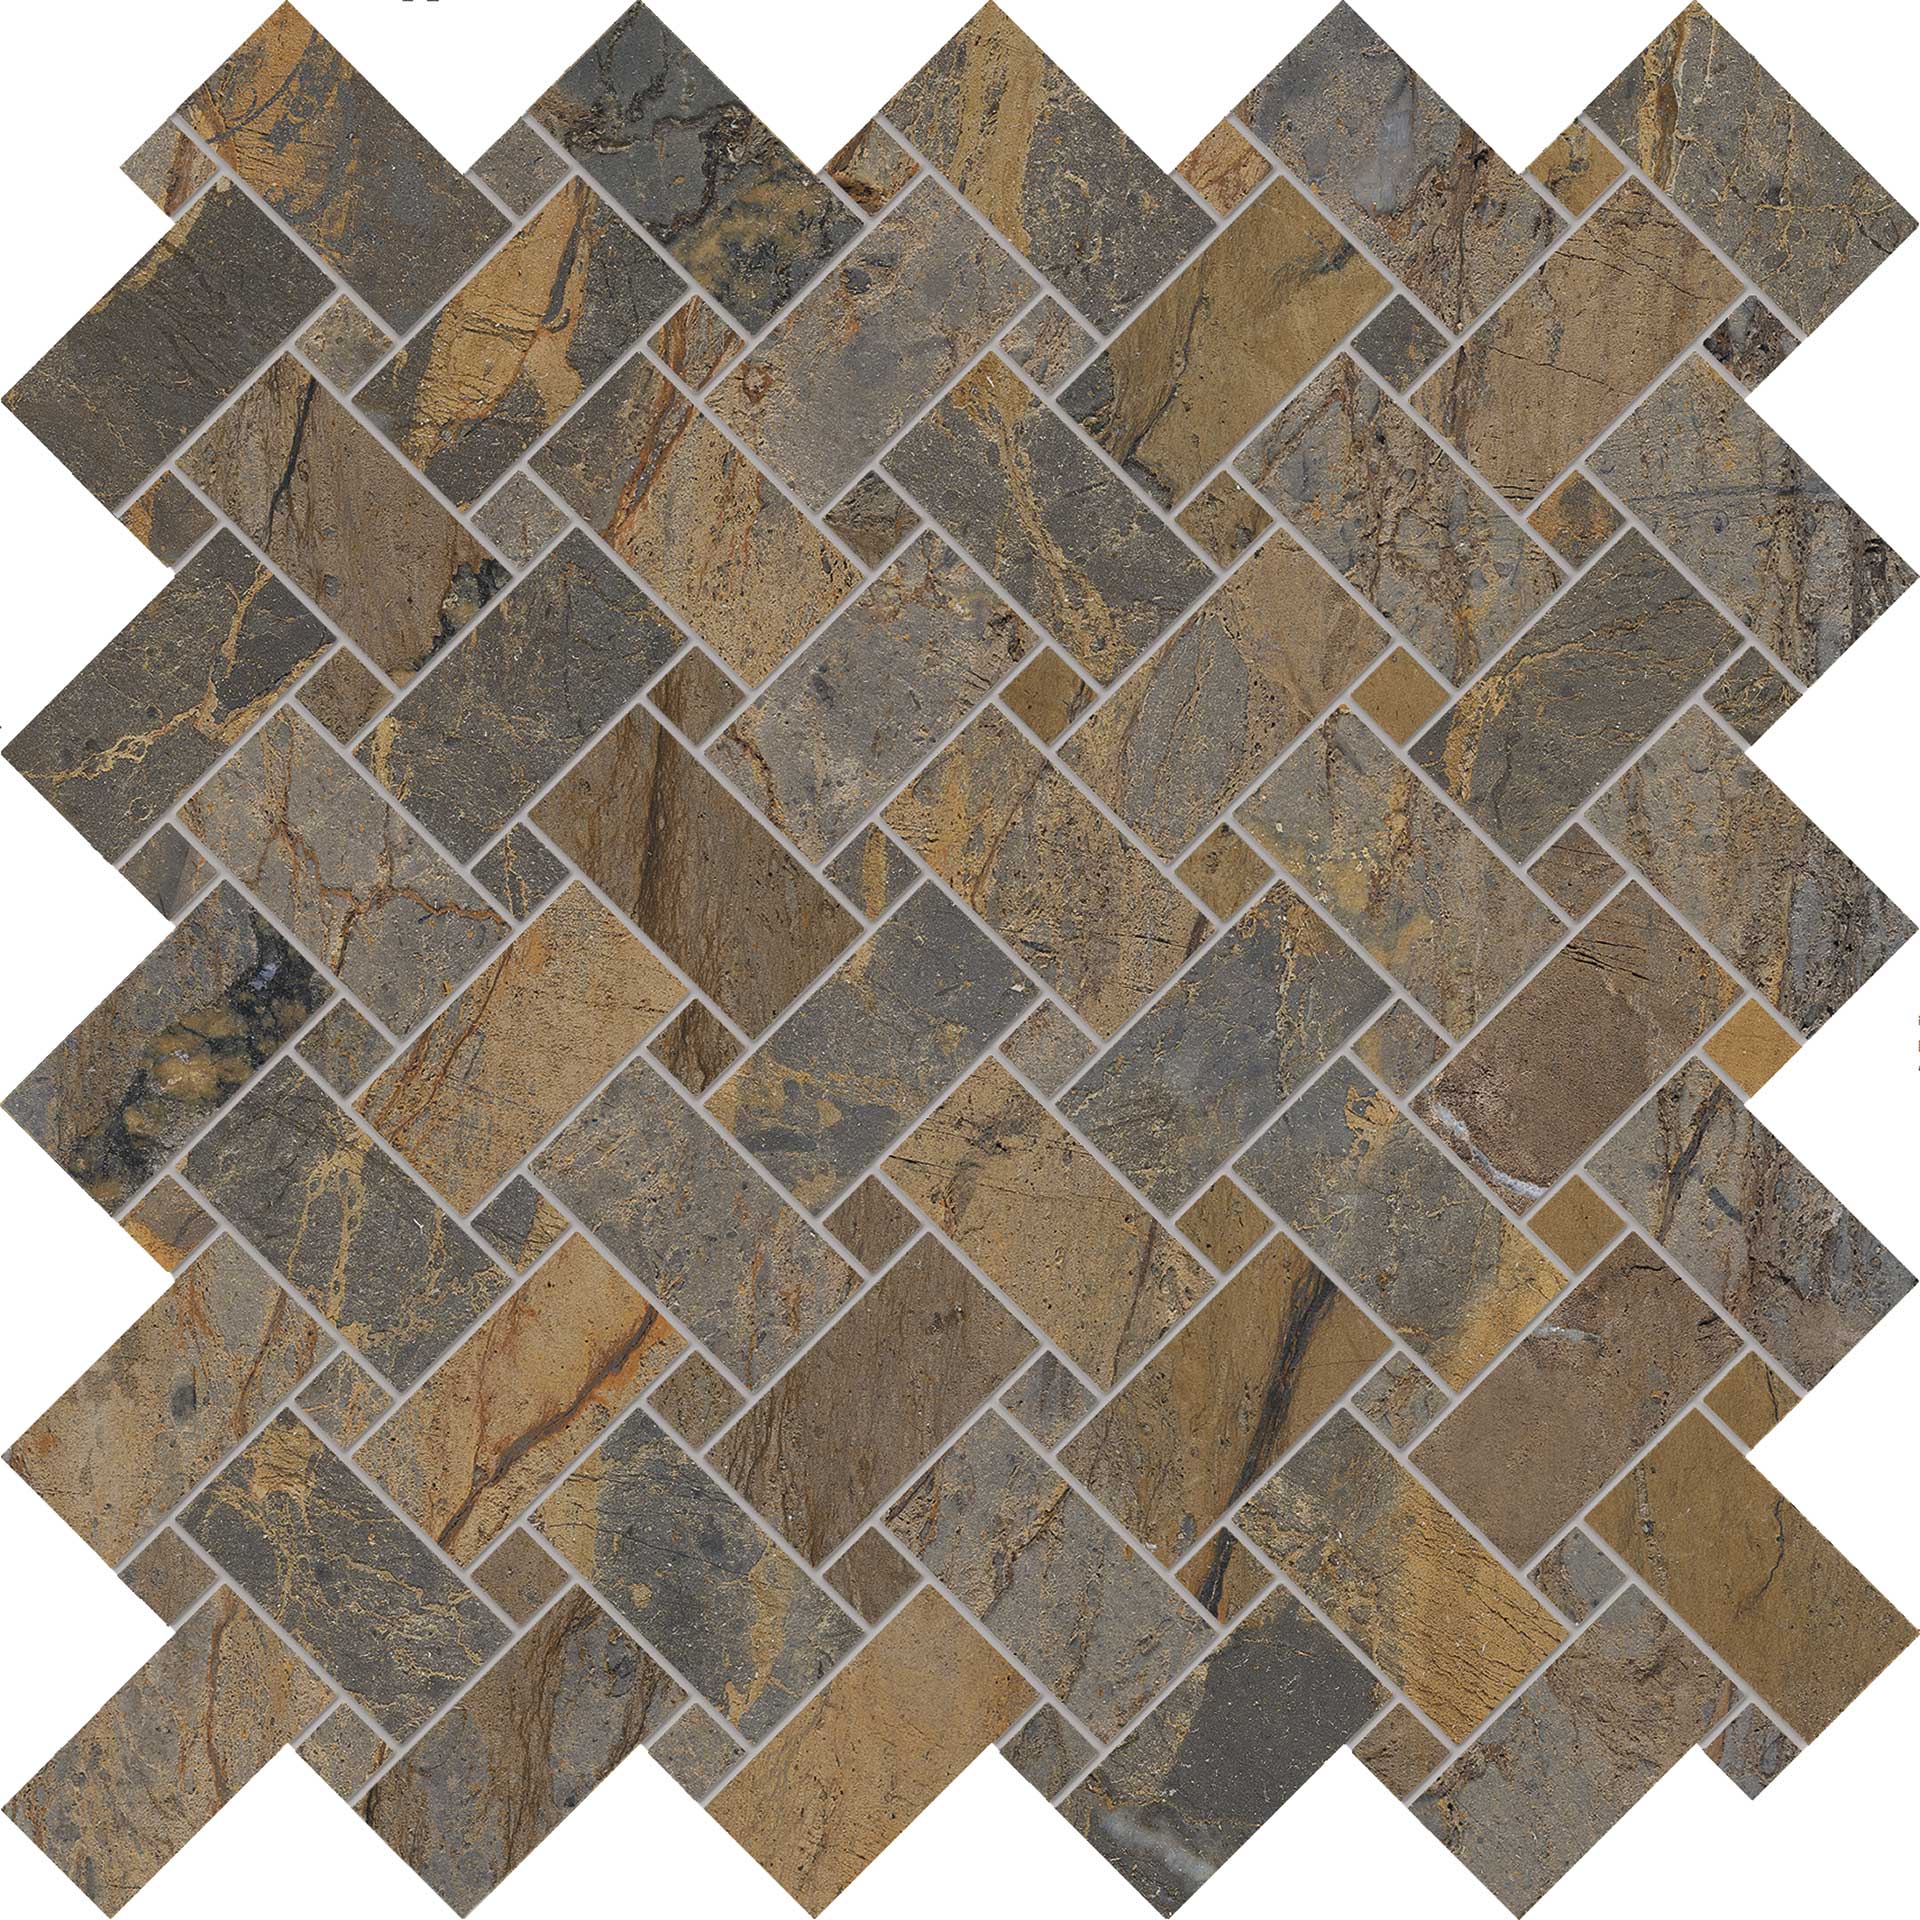 Tele Di Marmo Reloaded: Fossil Brown Malevic Basketweave Mosaic (12"x12"x9.5-mm | matte)